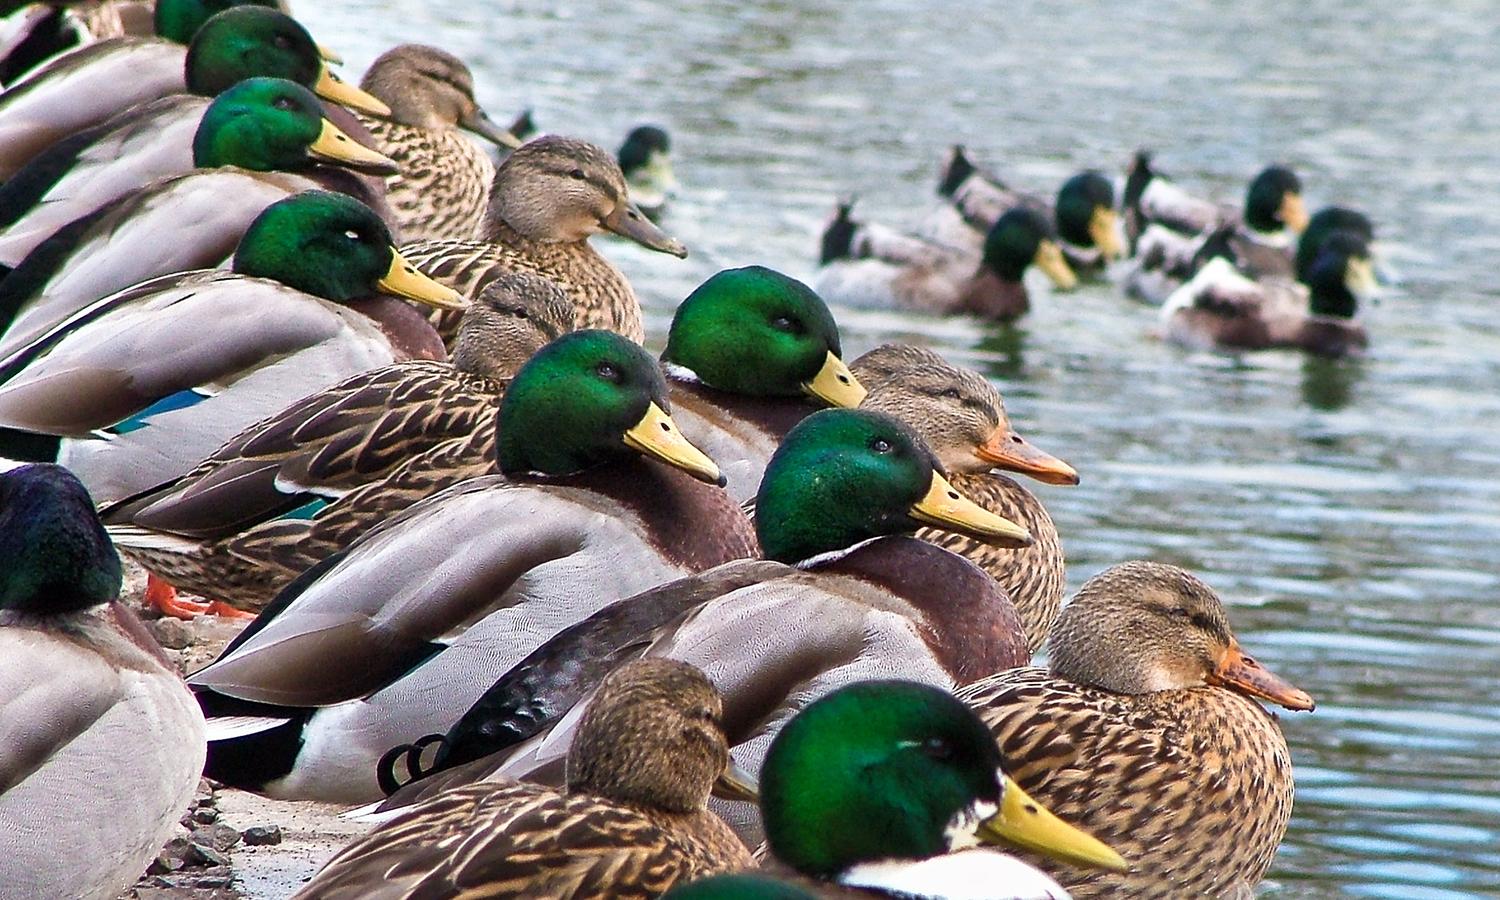 Rows of ducks stand on the shore.